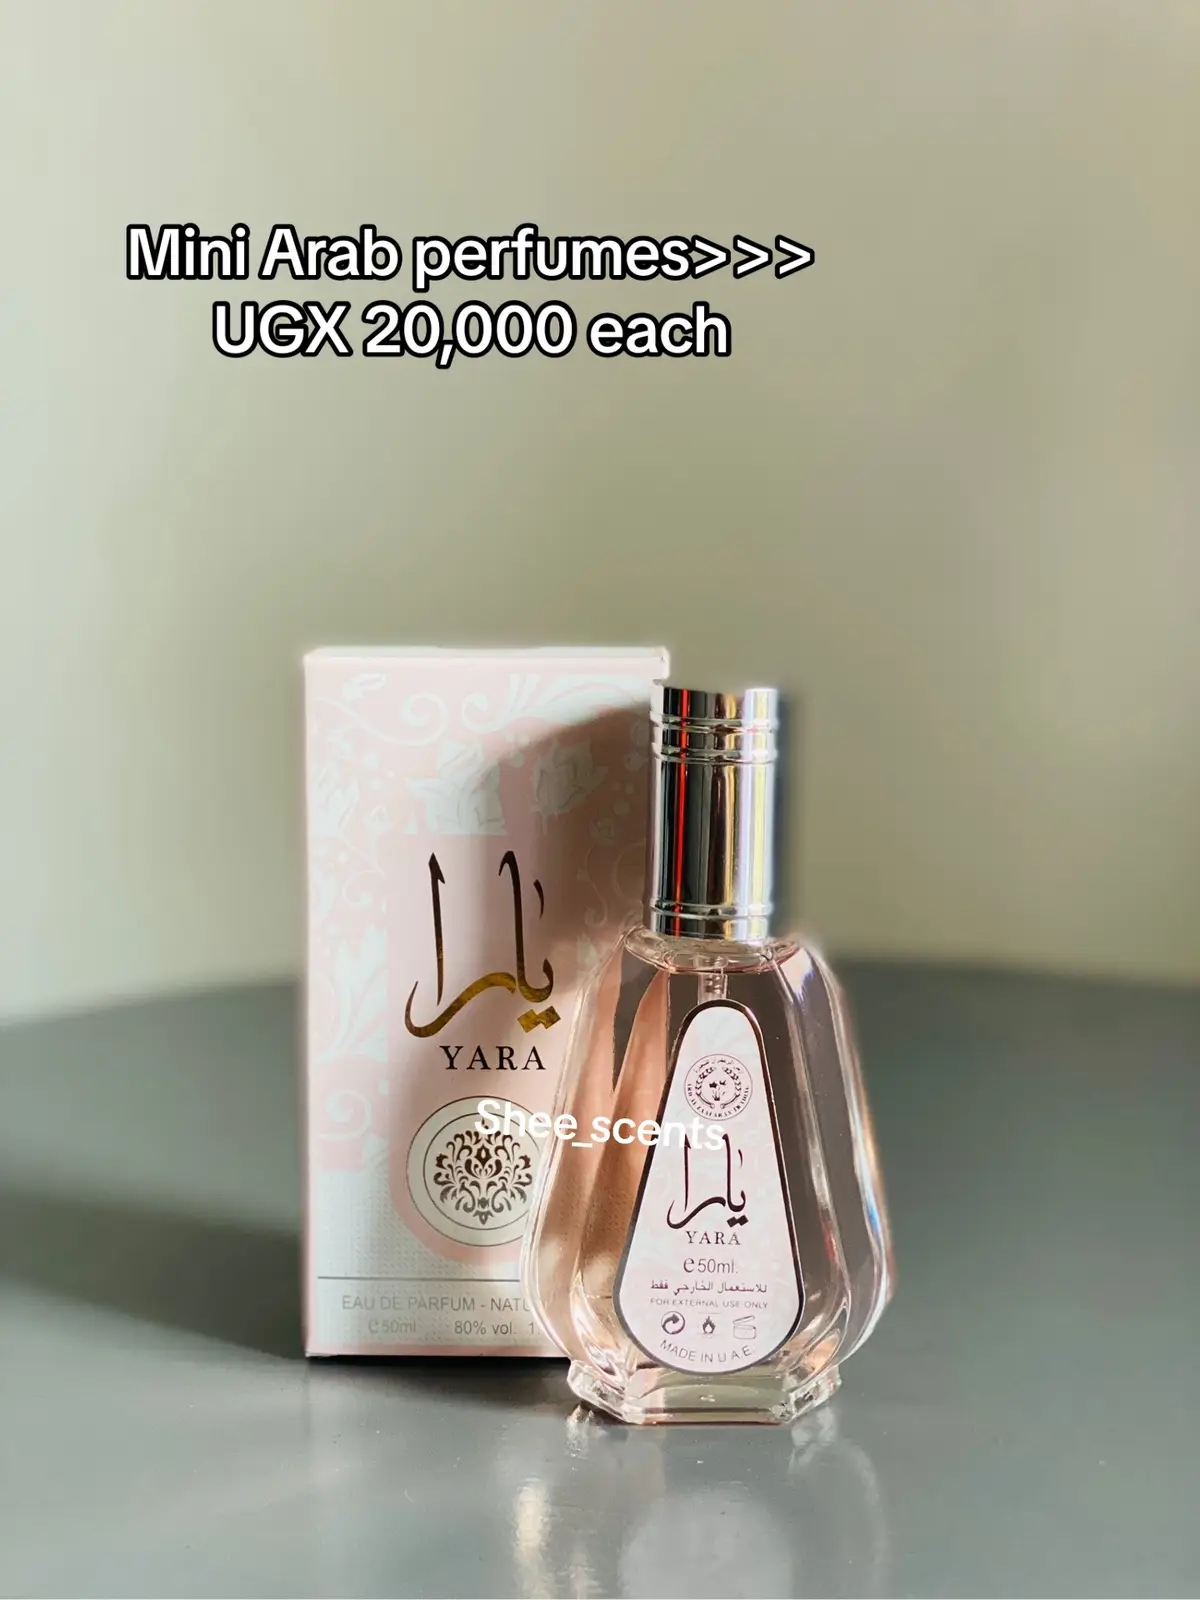 Grab yourself mini Arab perfumes at only ugx 20,000. 📞0754830032/0772383508 for inquiries. We do deliveries. #perfume #perfumetiktok #fy #shee_scents